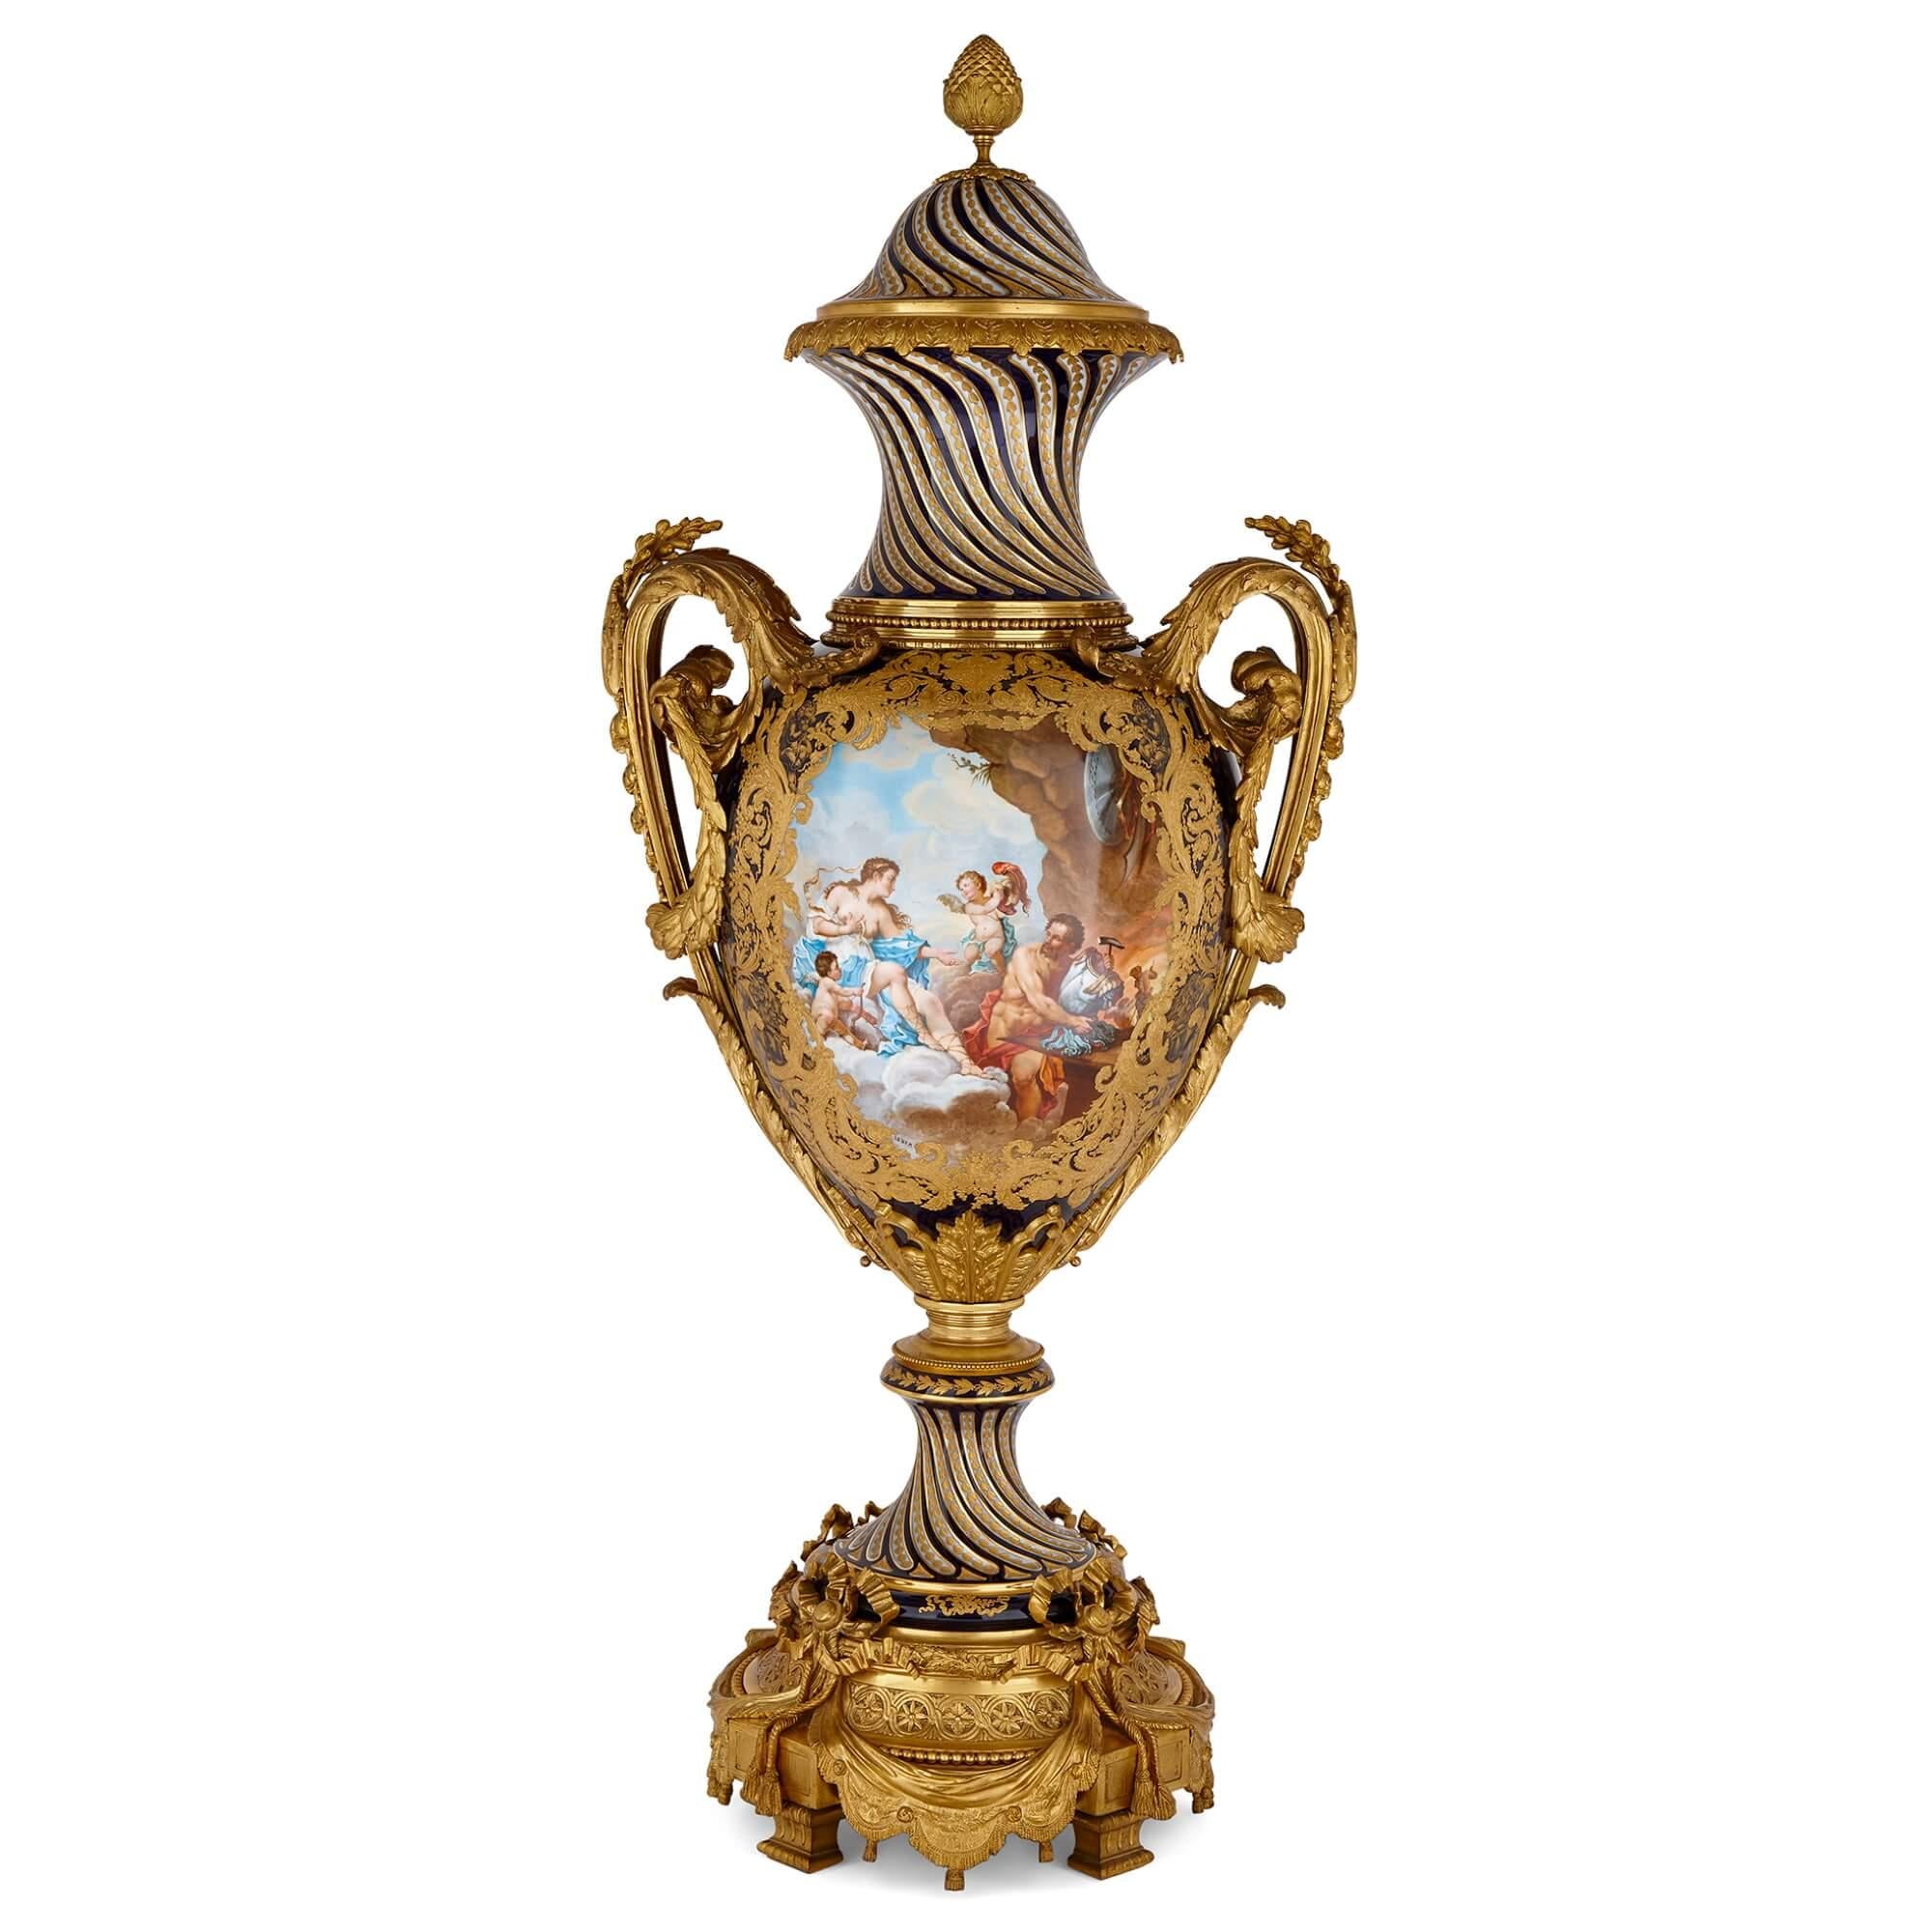 Large antique French Sèvres style porcelain and gilt bronze vase 
French, 19th Century 
Overall dimensions: Height 157cm, width 60cm, depth 44cm
Vase: Height 141cm, width 60cm, depth 44cm
Base: Height 16cm, width 41cm, depth 41cm

This outstanding